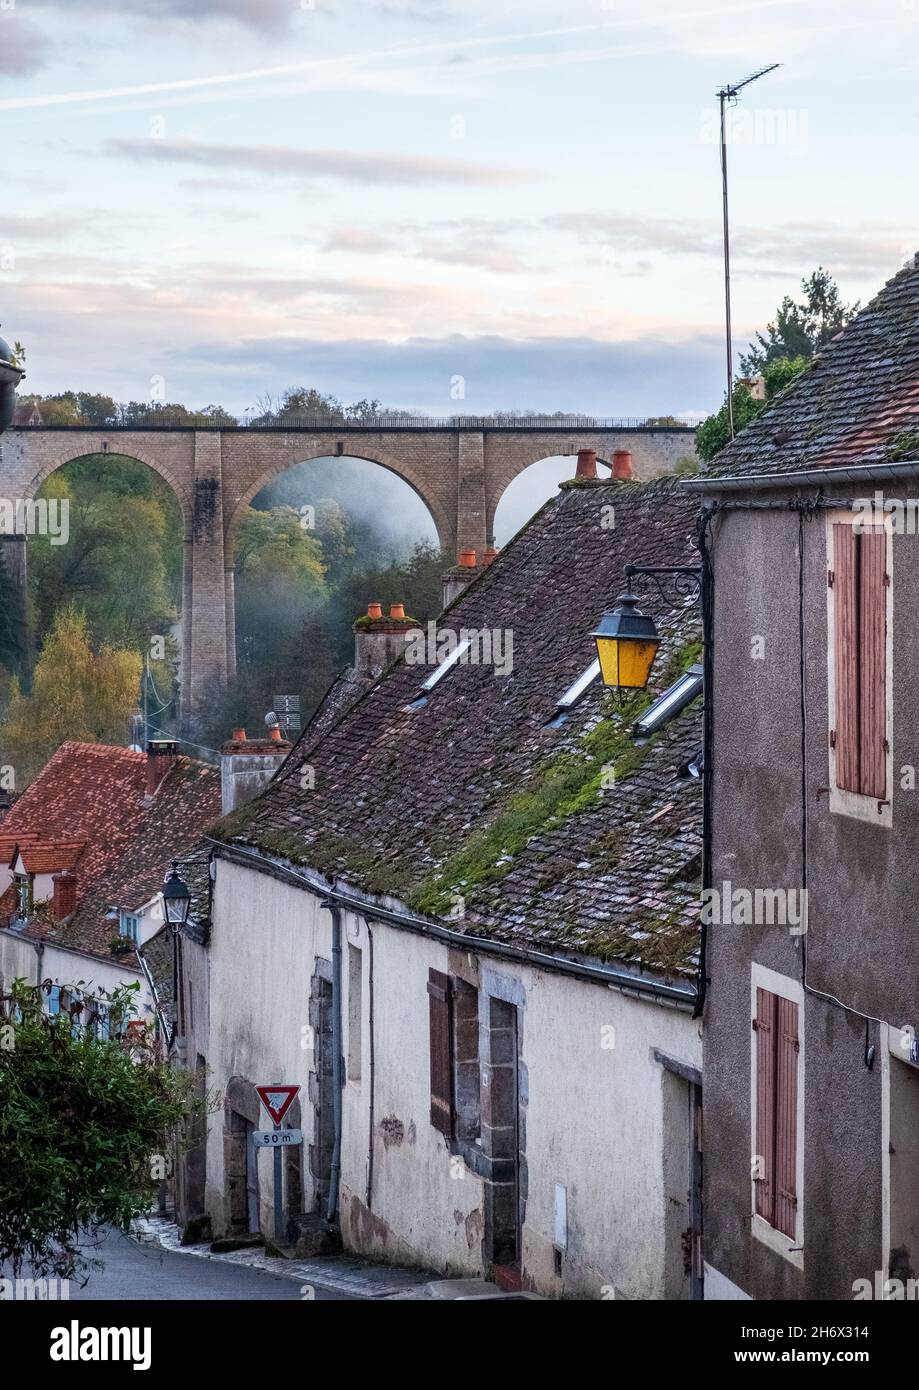 A rail viaduct at the town  of Semur-en-Auxois, Cote d'Or, France Stock Photo